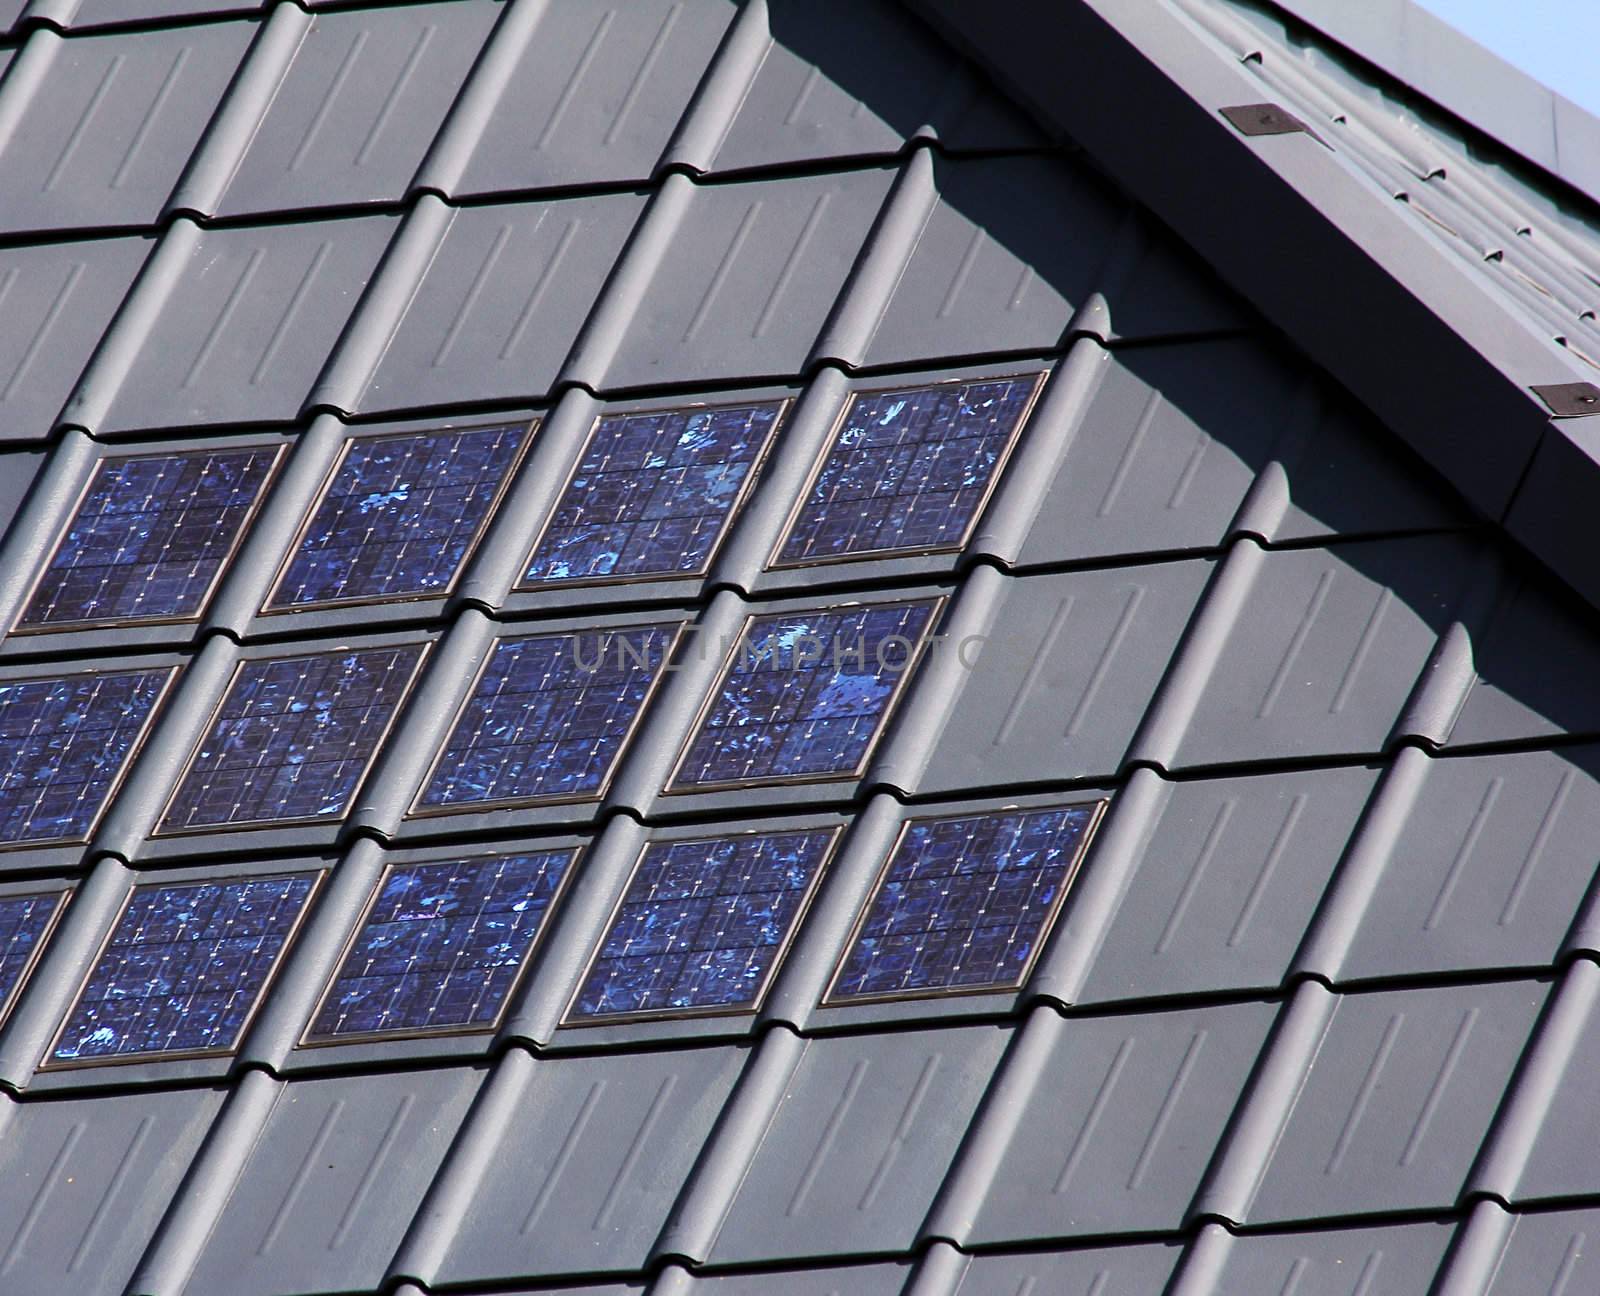 solar roofing tiles by Hasenonkel